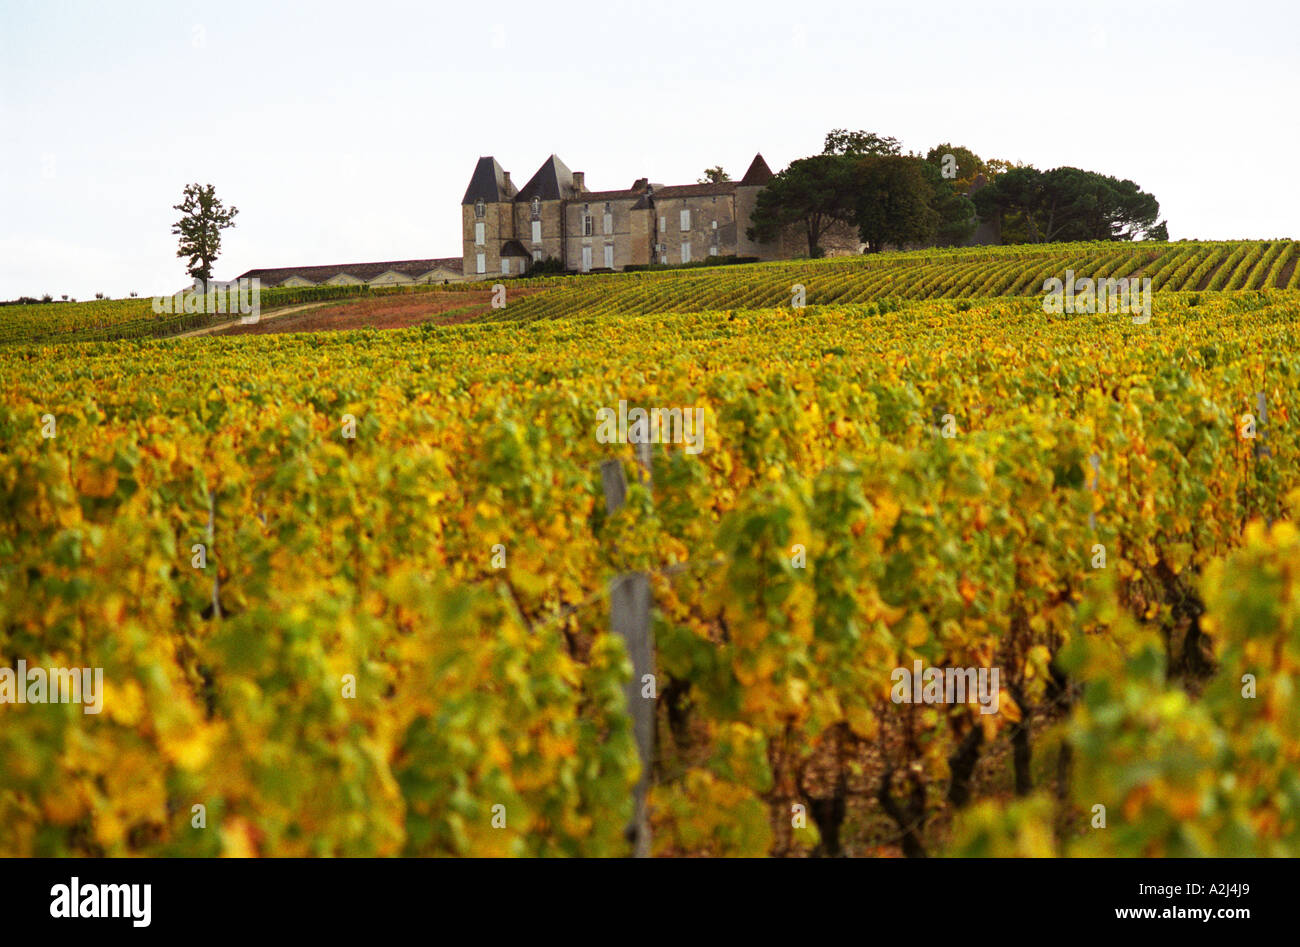 A view of Chateau Yquem and its vineyard in Sauternes. At harvest time with vines with yellow autumn colour leaves on the rolling hill. The medieval chateau on the hilltop in the background. Château d'Yquem, Sauternes, Bordeaux Gironde Aquitaine France Europe Stock Photo